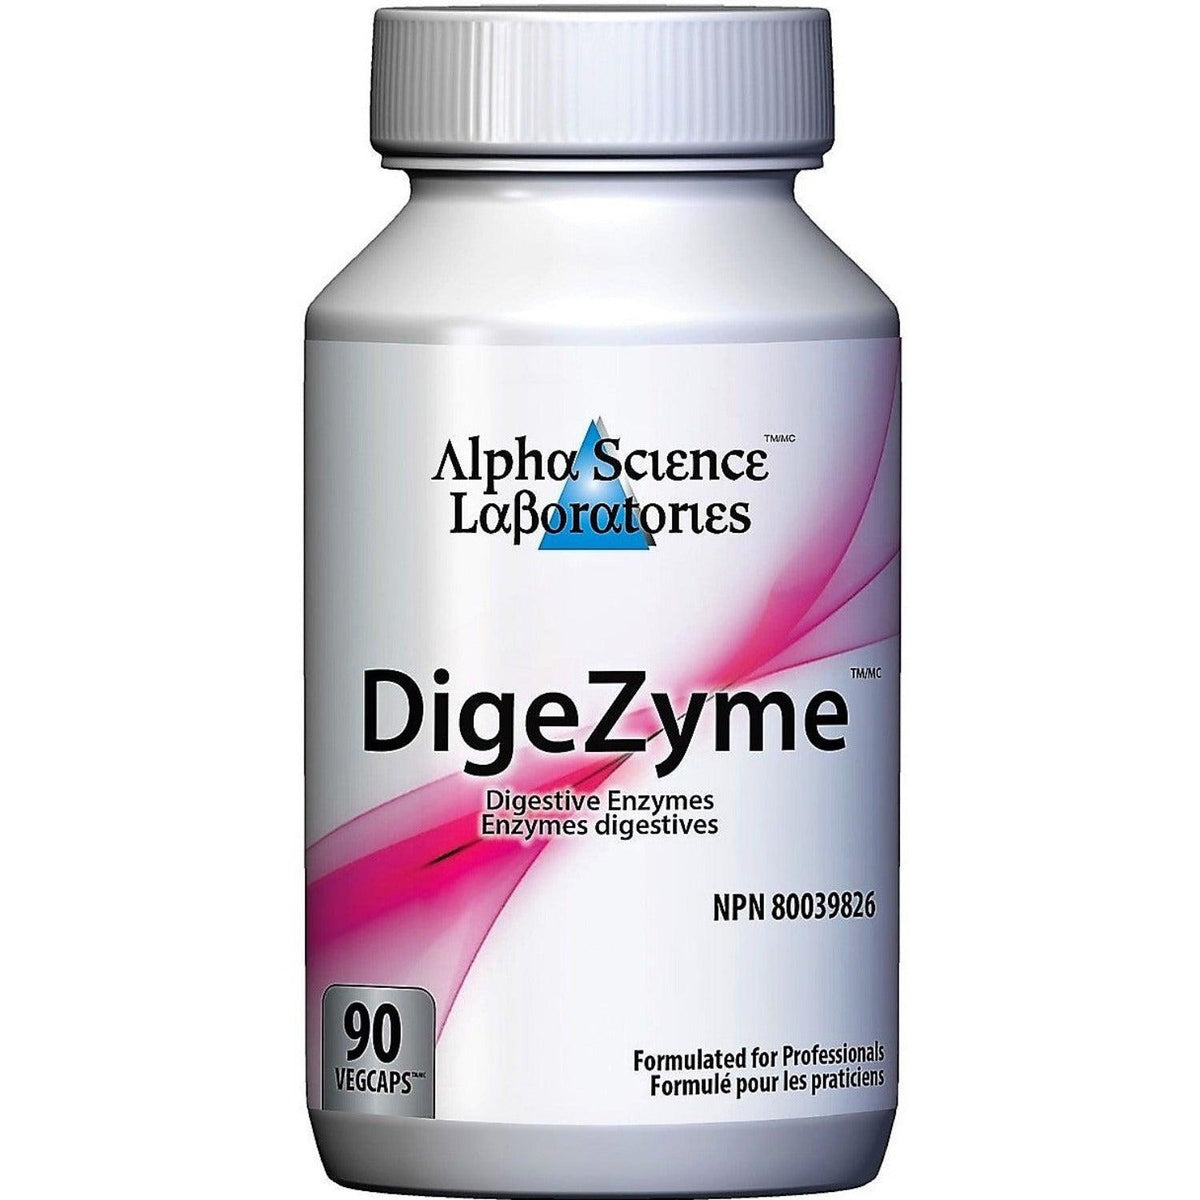 Alpha Science Digezyme 90 capsules Supplements - Digestive Enzymes at Village Vitamin Store